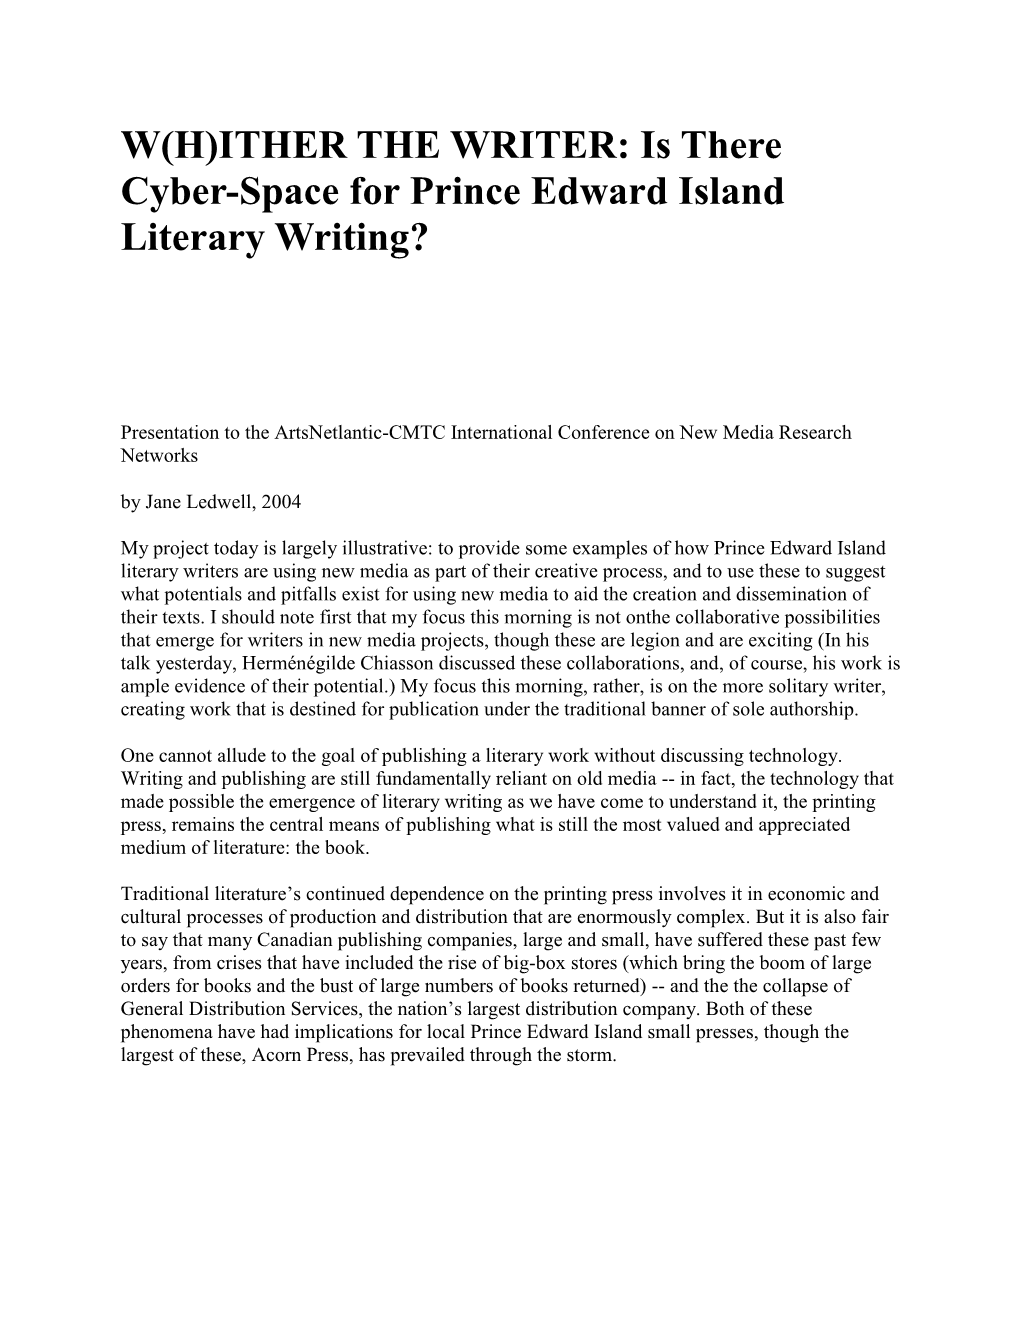 Is There Cyber-Space for Prince Edward Island Literary Writing?